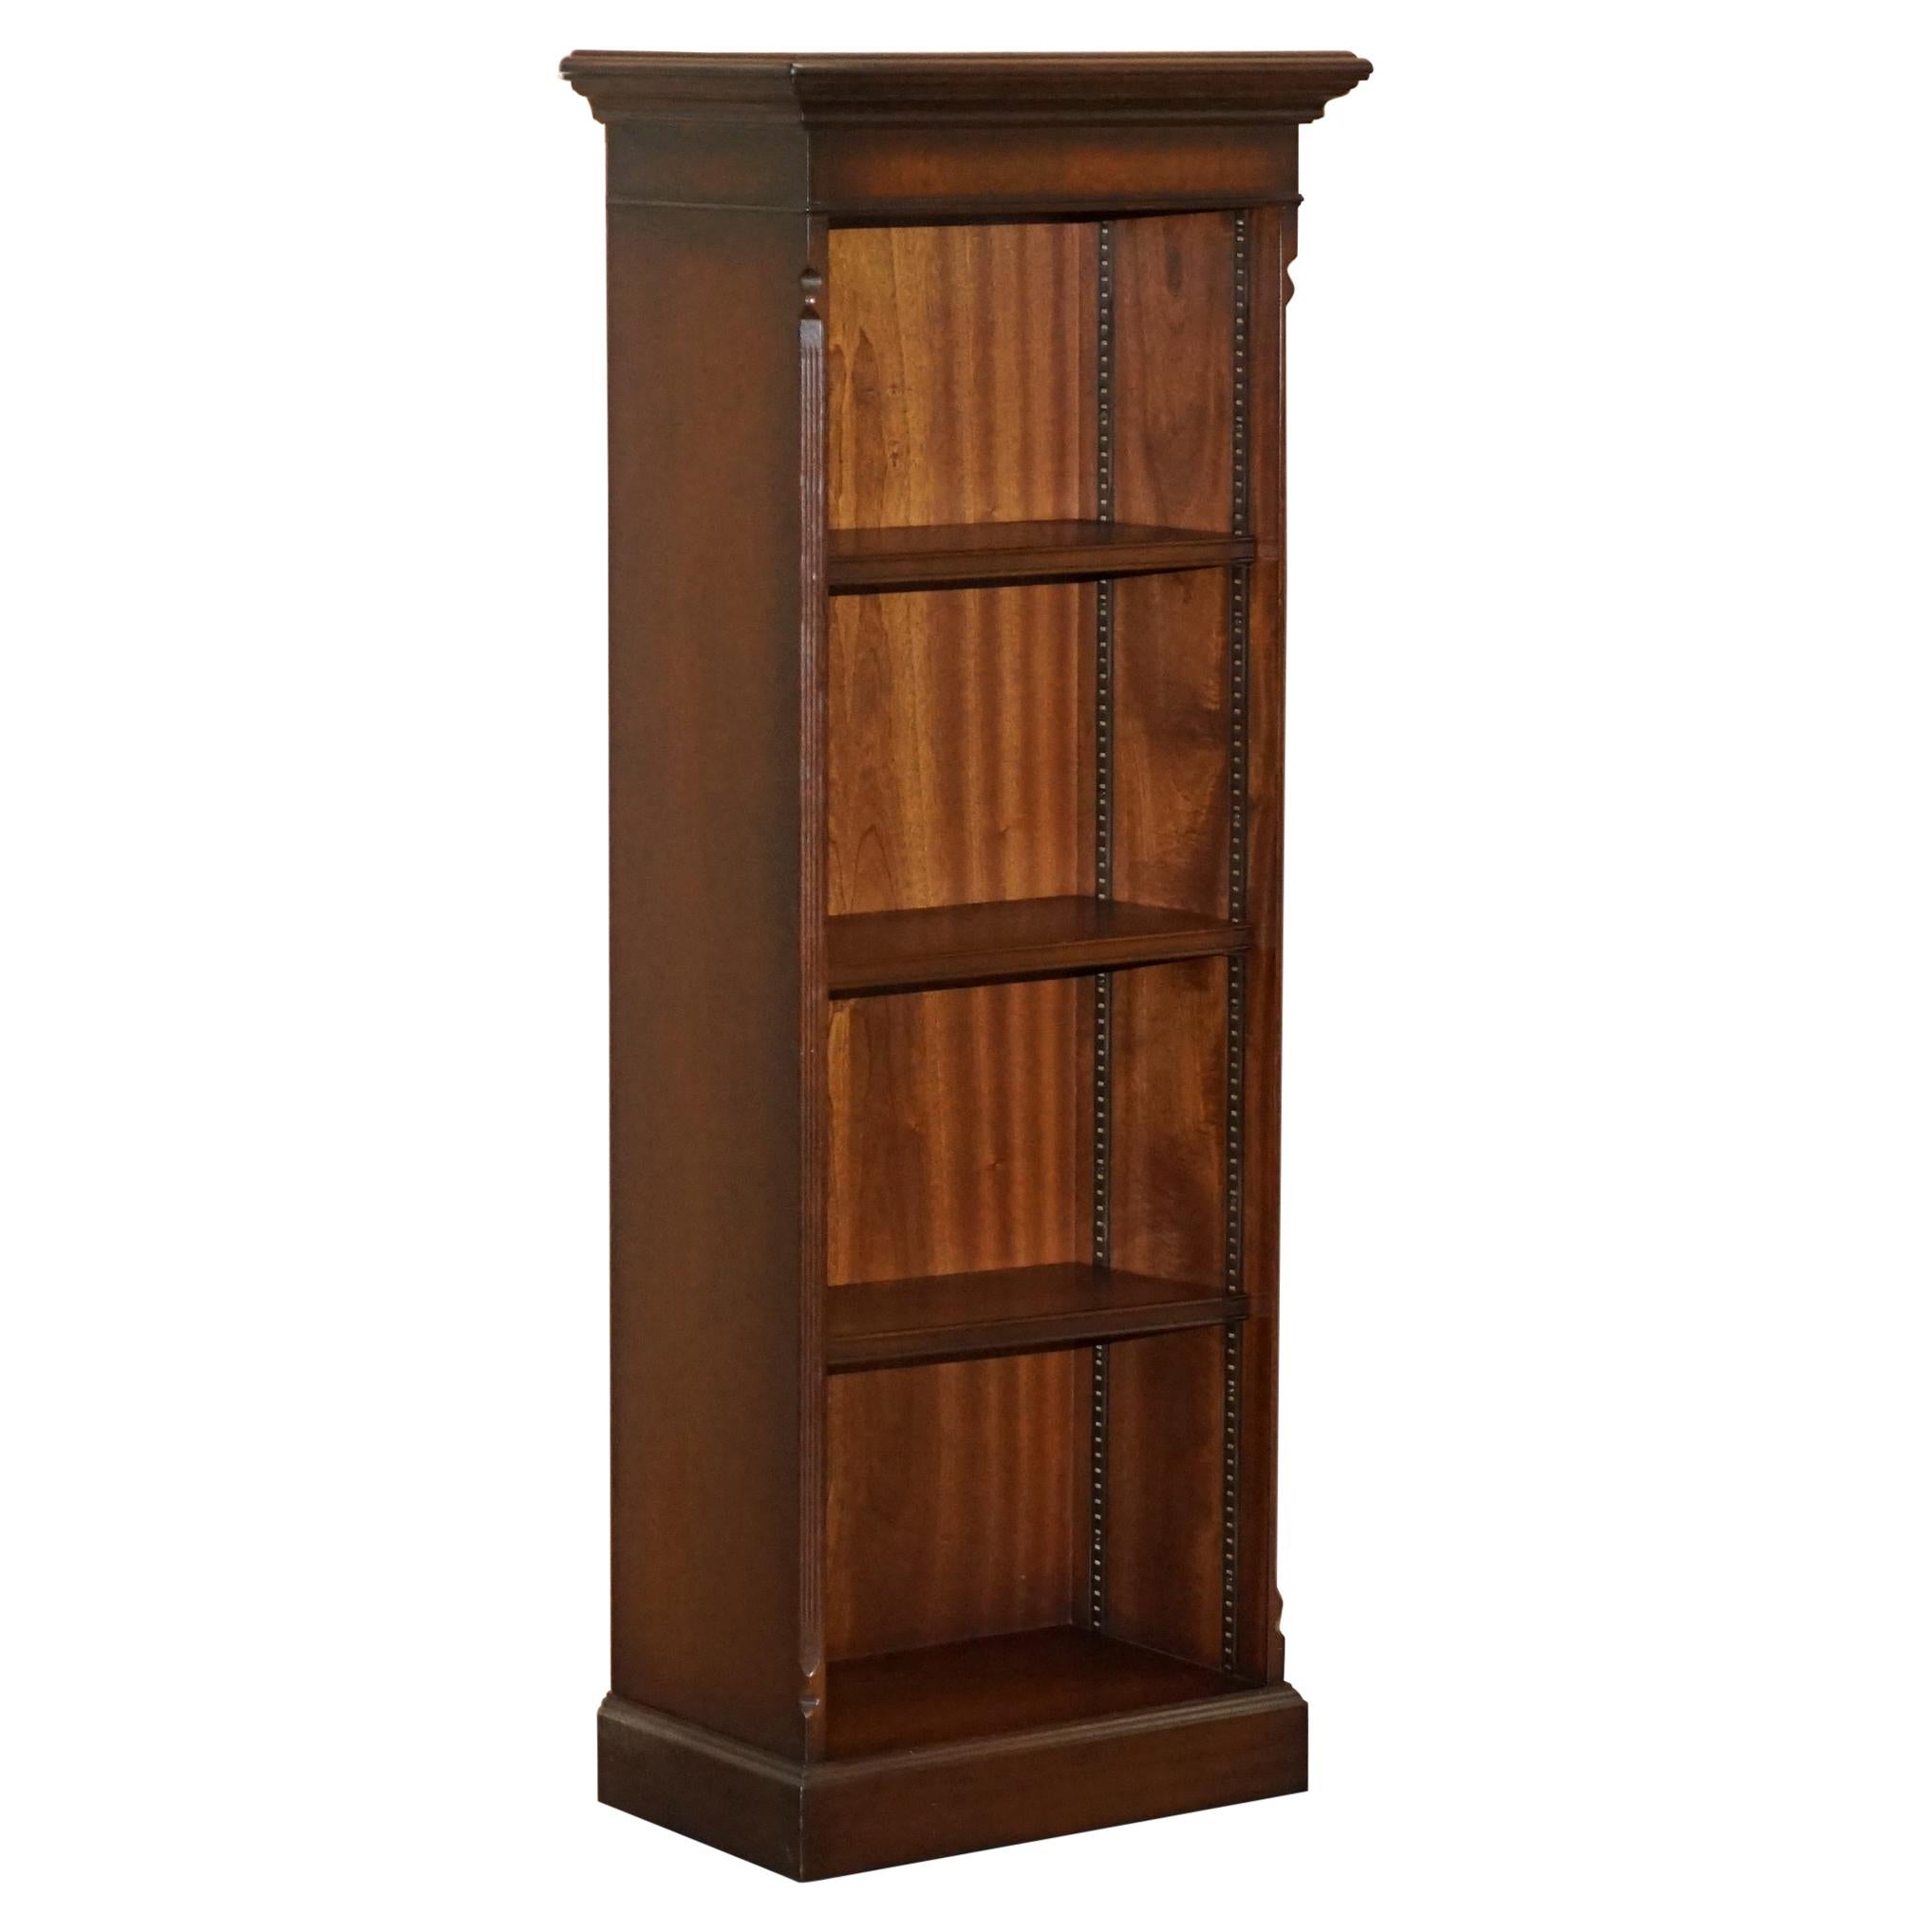 Vintage Mahogany Library Bookcase with Height Adjustable Shelves